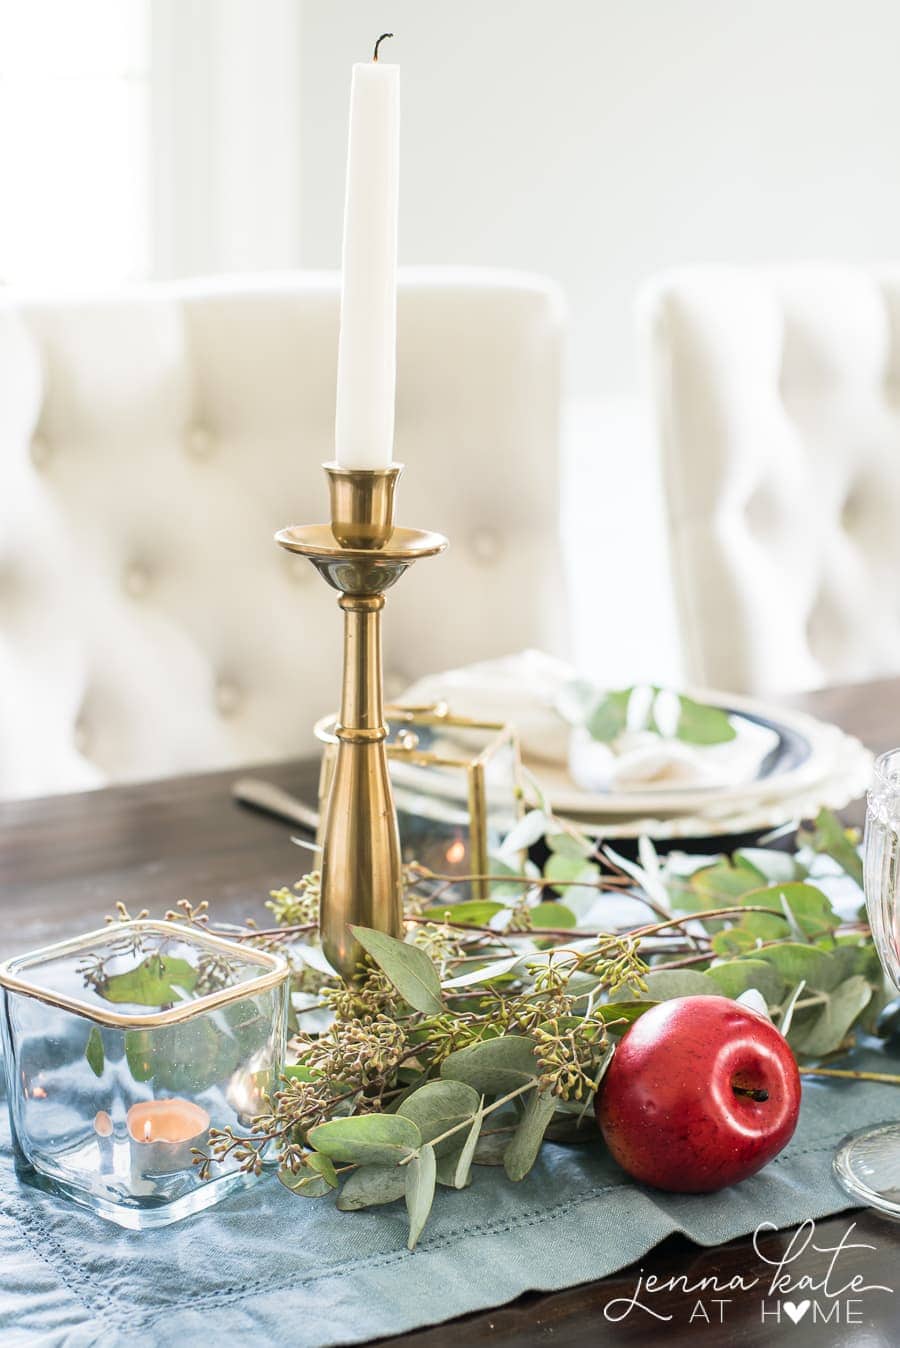 Fall centerpiece with candles. Decor ideas for autumn 2020